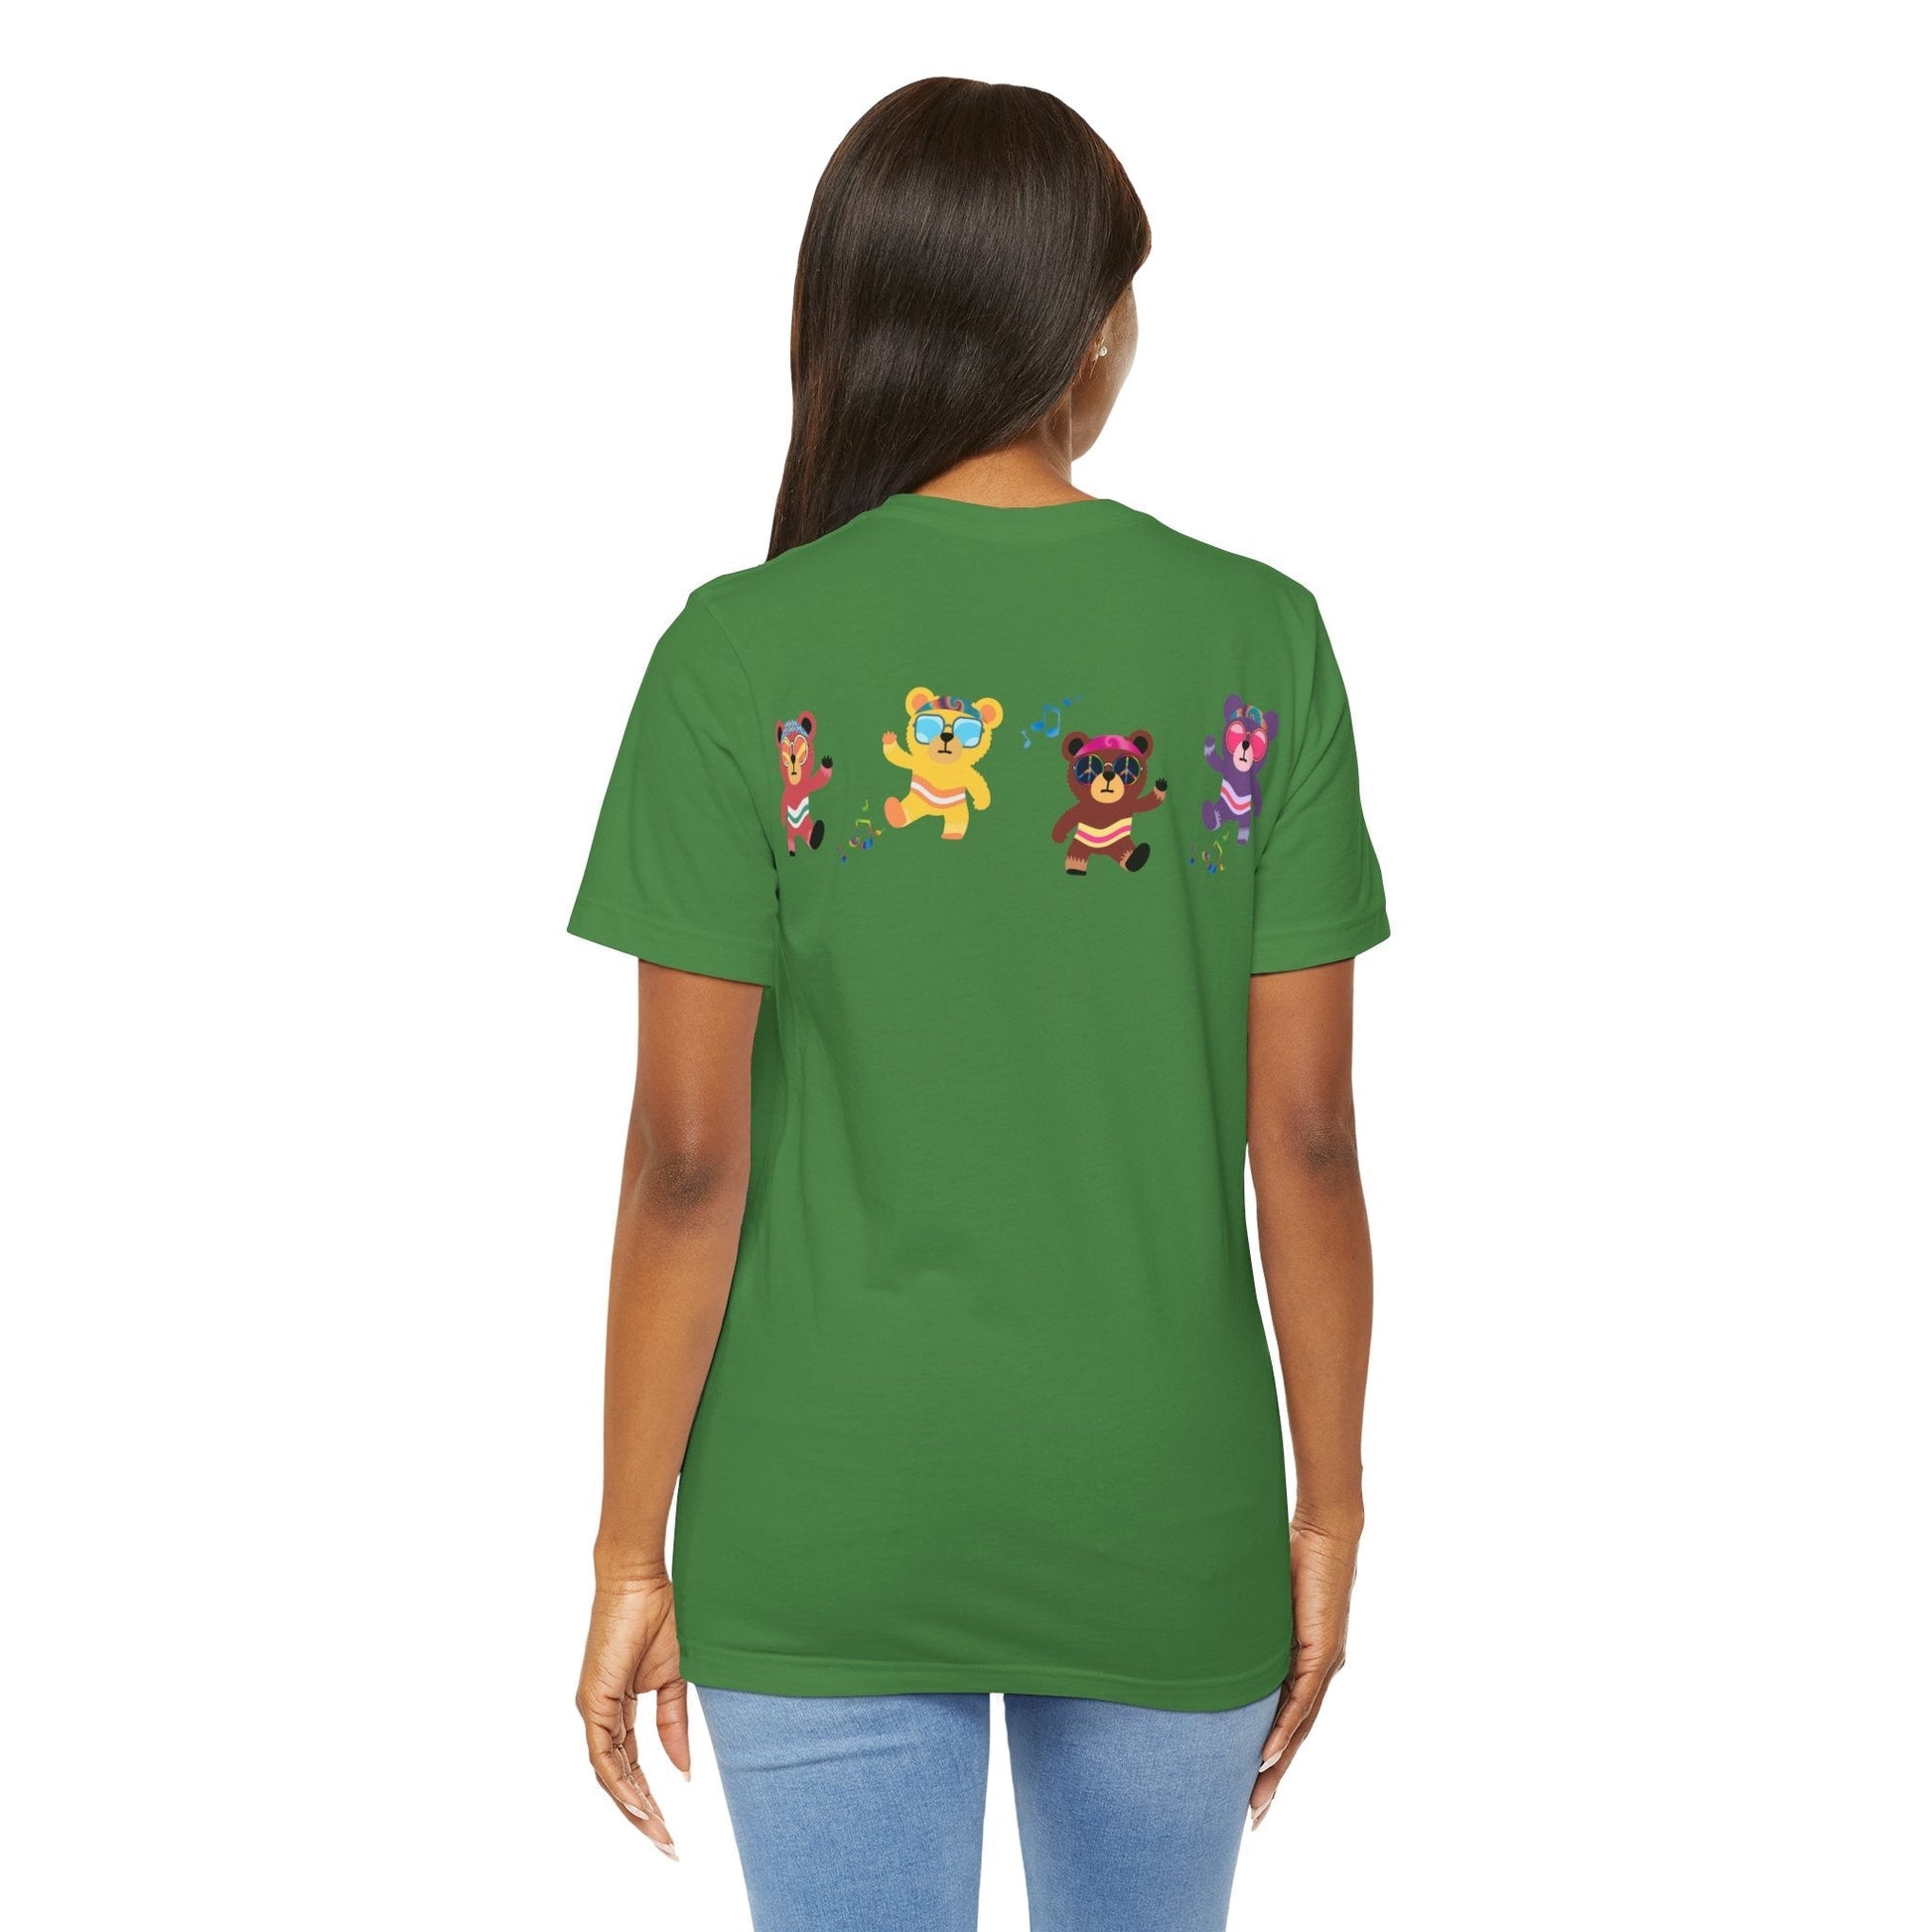 Groovy Dancing Bears Adult Cotton Tee Personalize Free